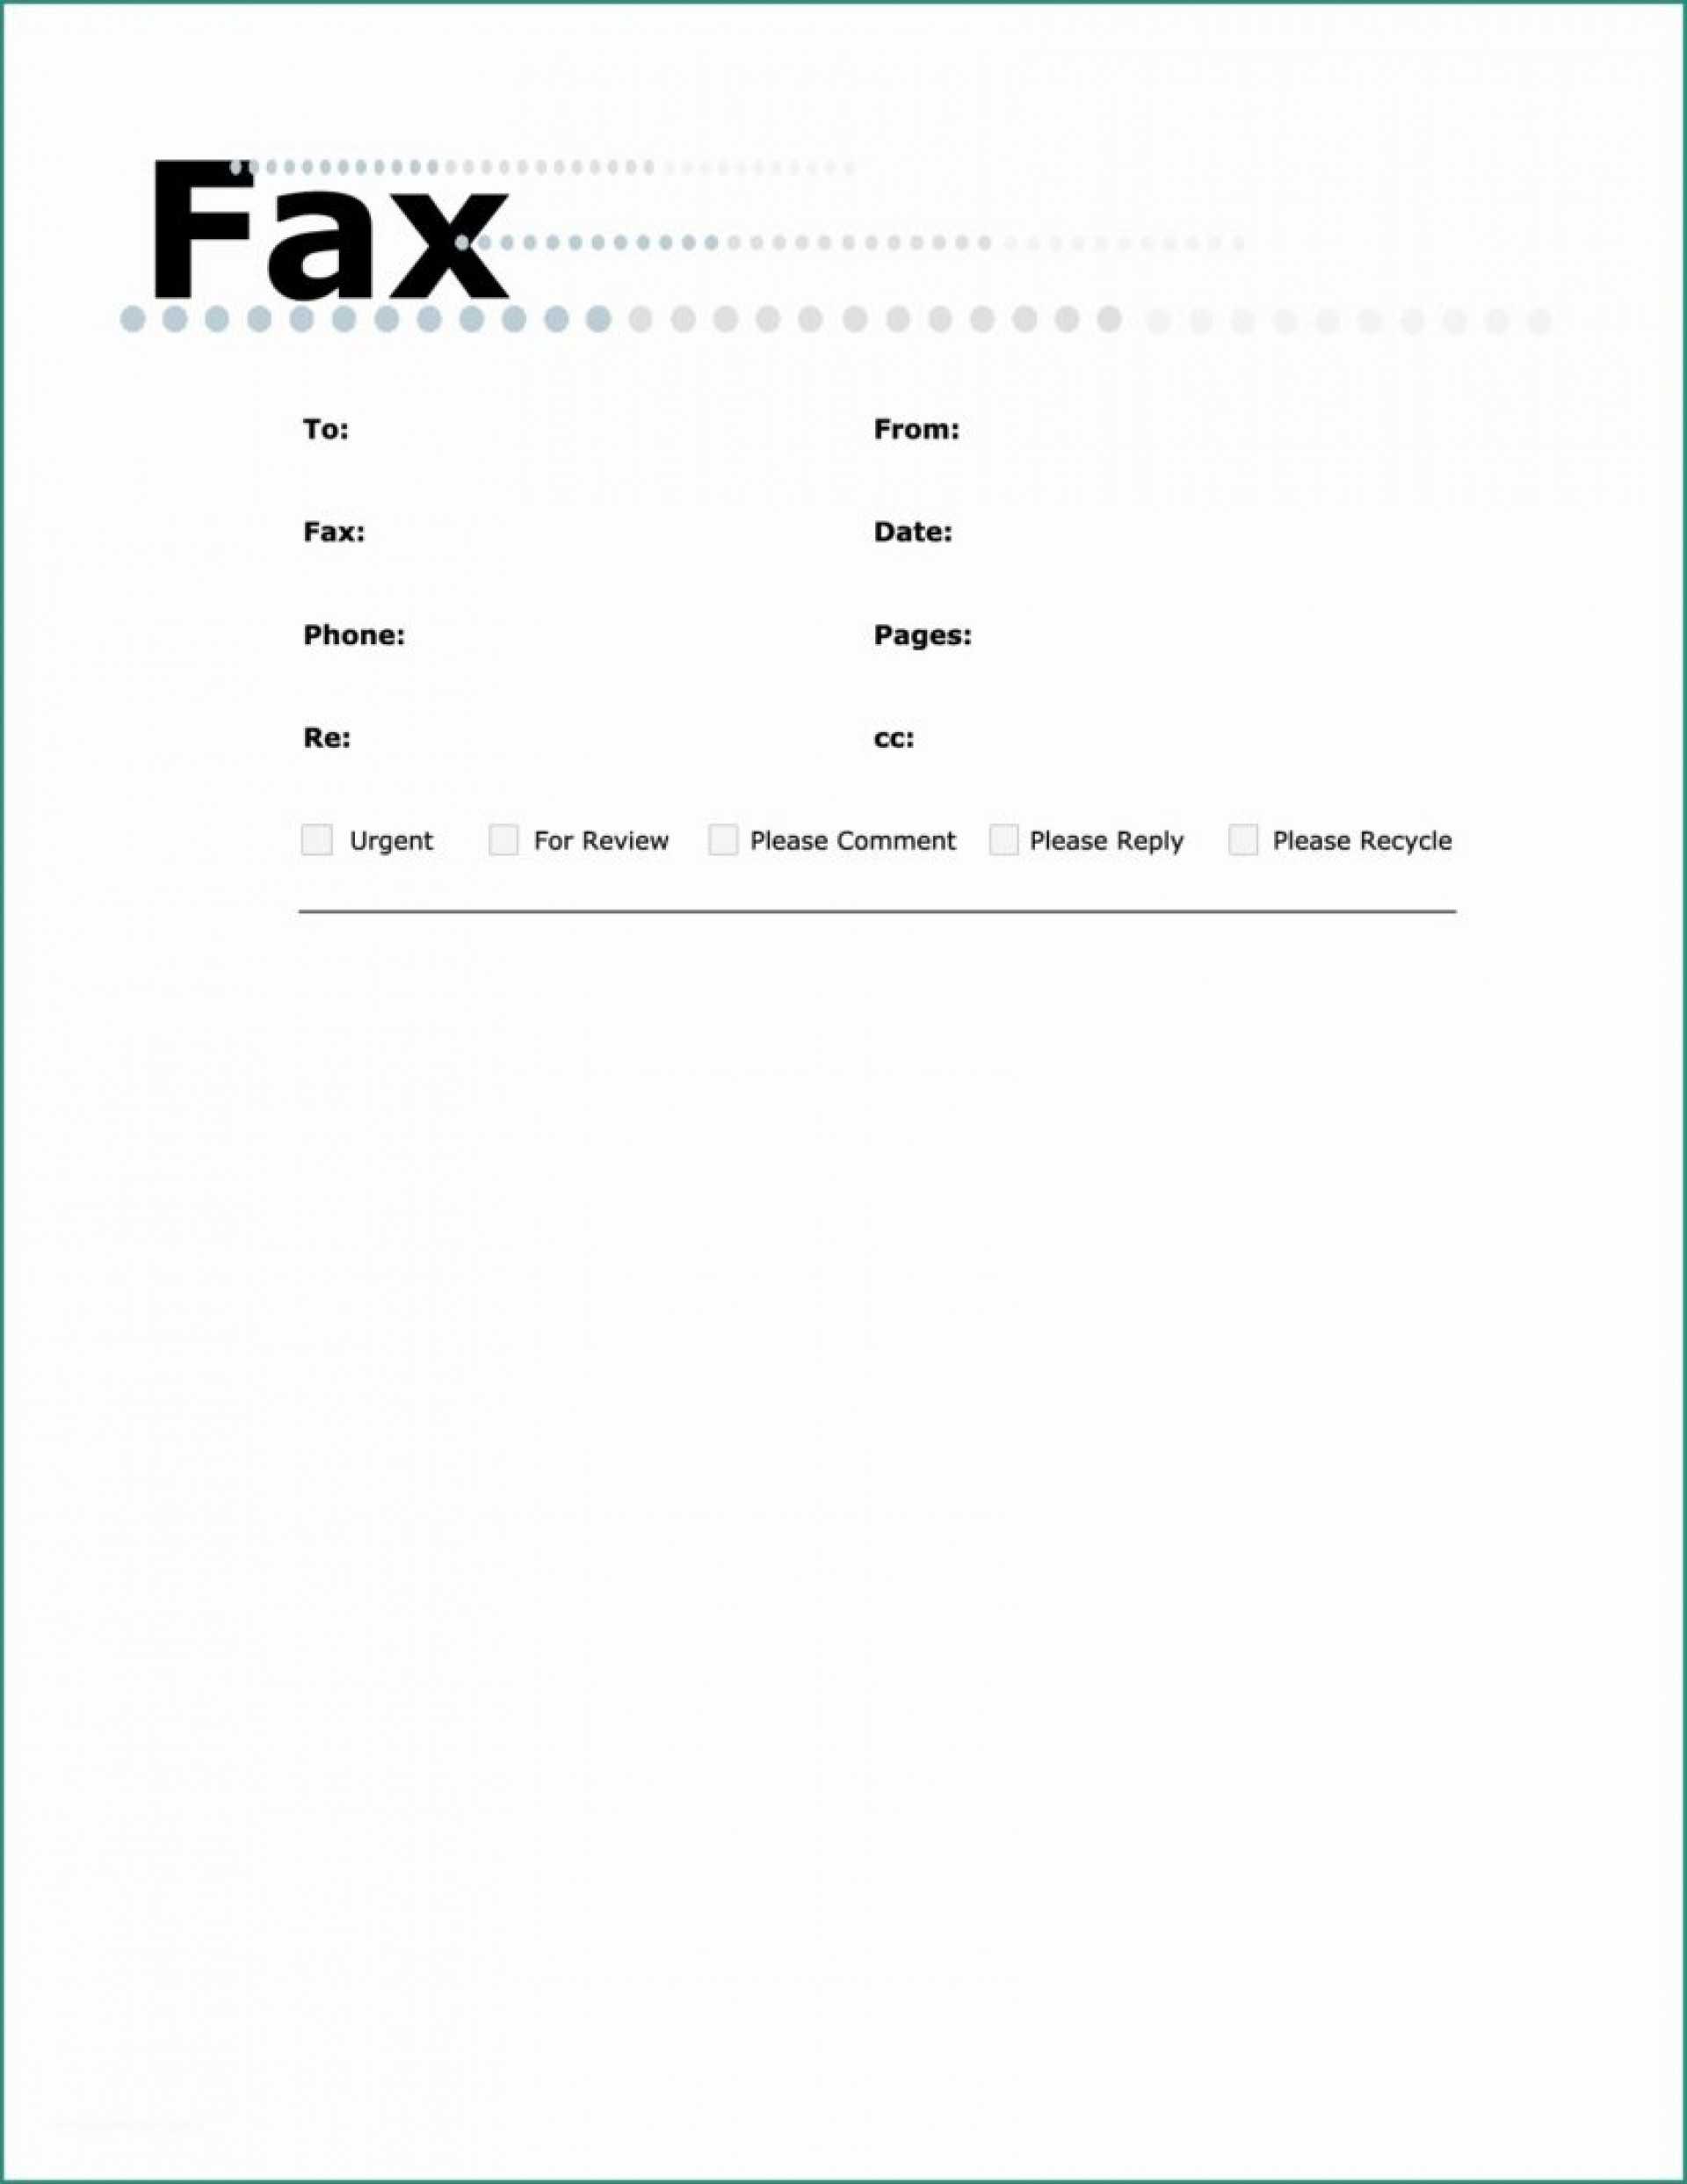 Basic Fax Cover Sheet Sample Pdf Free – Howwikipediaworks In Fax Template Word 2010